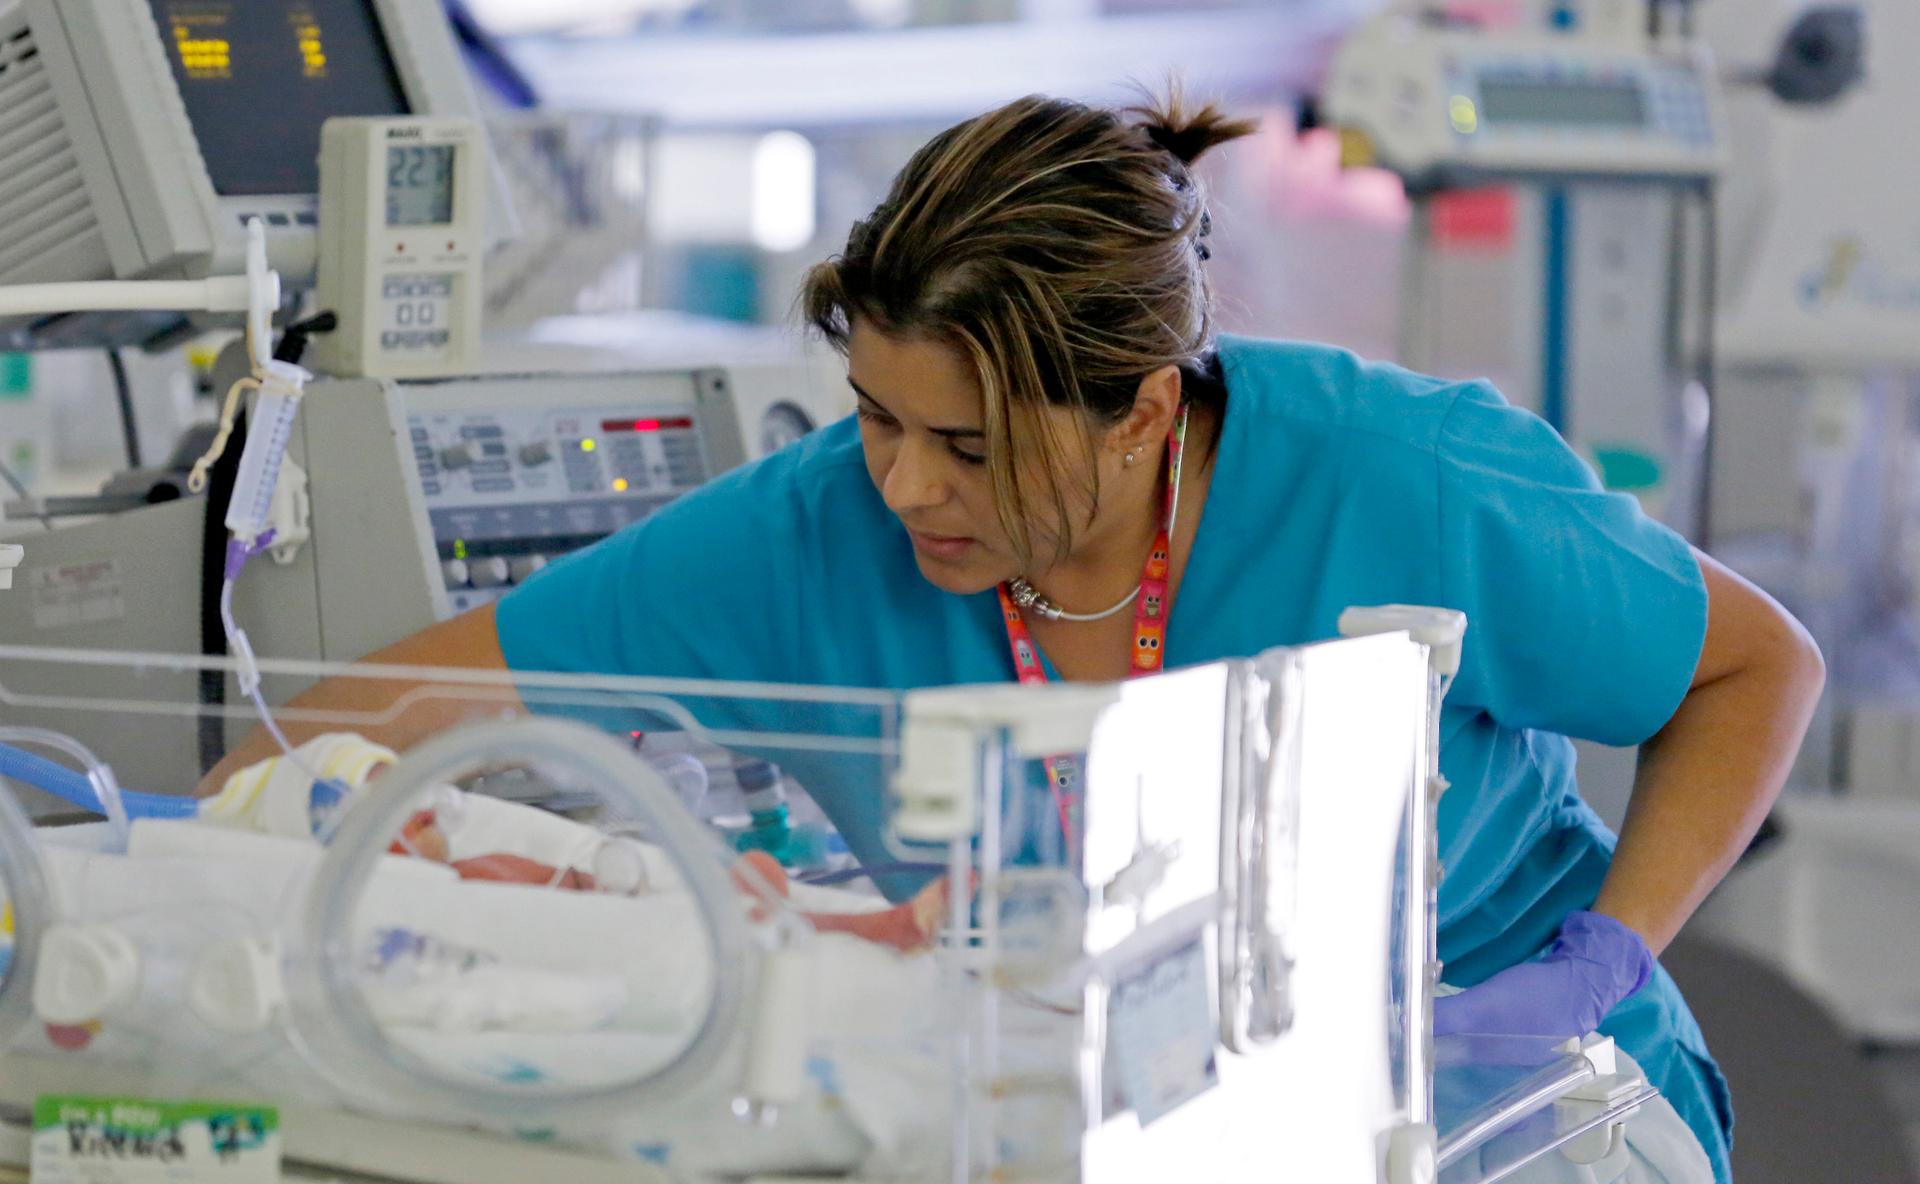 A nurse attends to an infant in the neonatal intensive care unit of the Holtz Children's Hospital at Jackson Memorial Hospital in Miami.